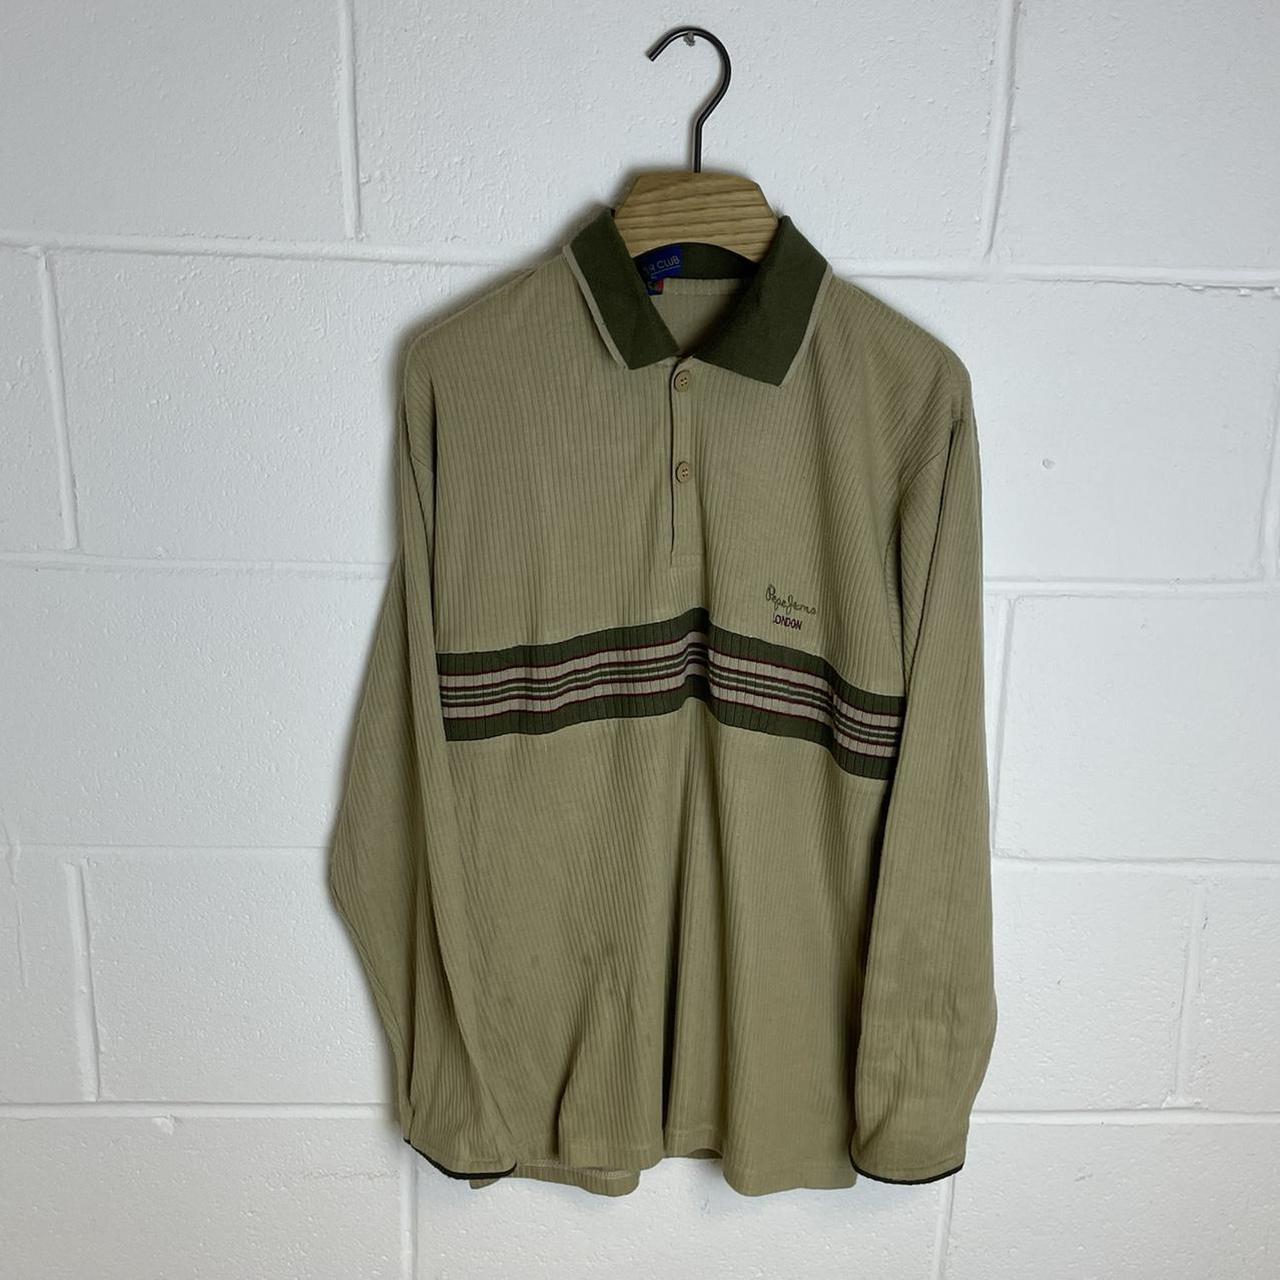 Vintage 90s Pepe Jeans London Embroidered Striped... - Depop